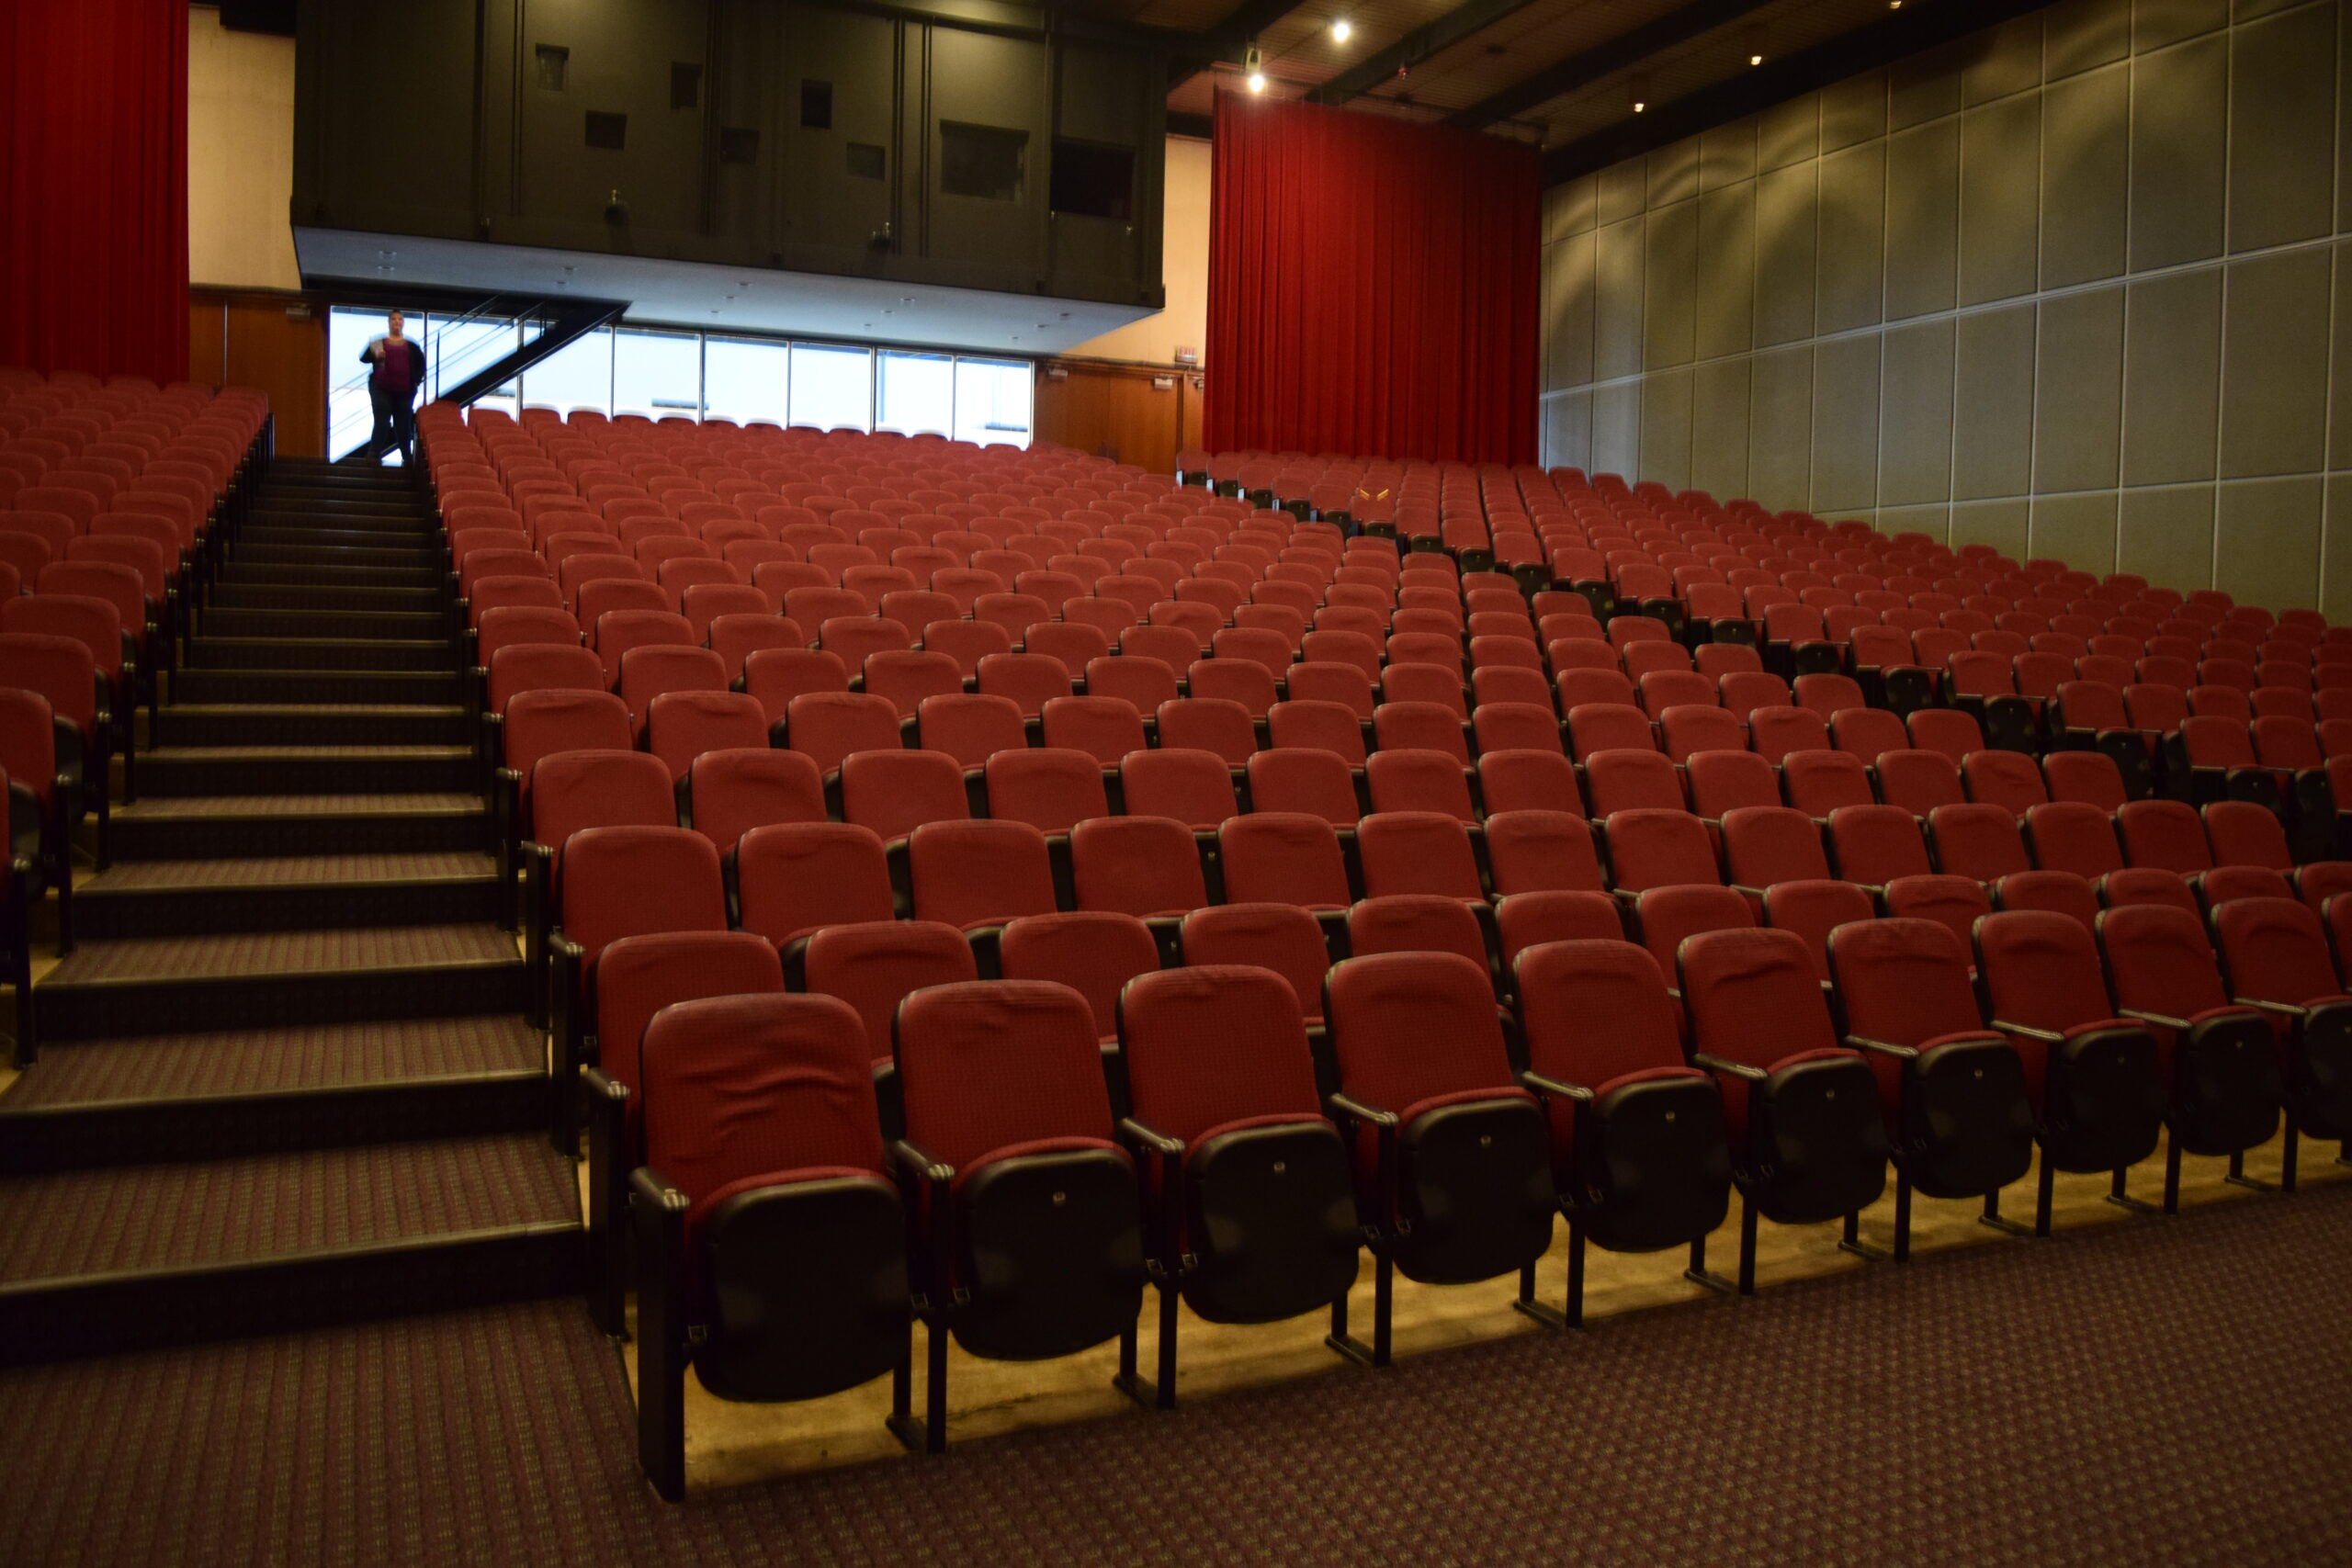 A large auditorium seen from the front, with two aisles ascending in long steps, and three blocks of red cushioned theater chairs.